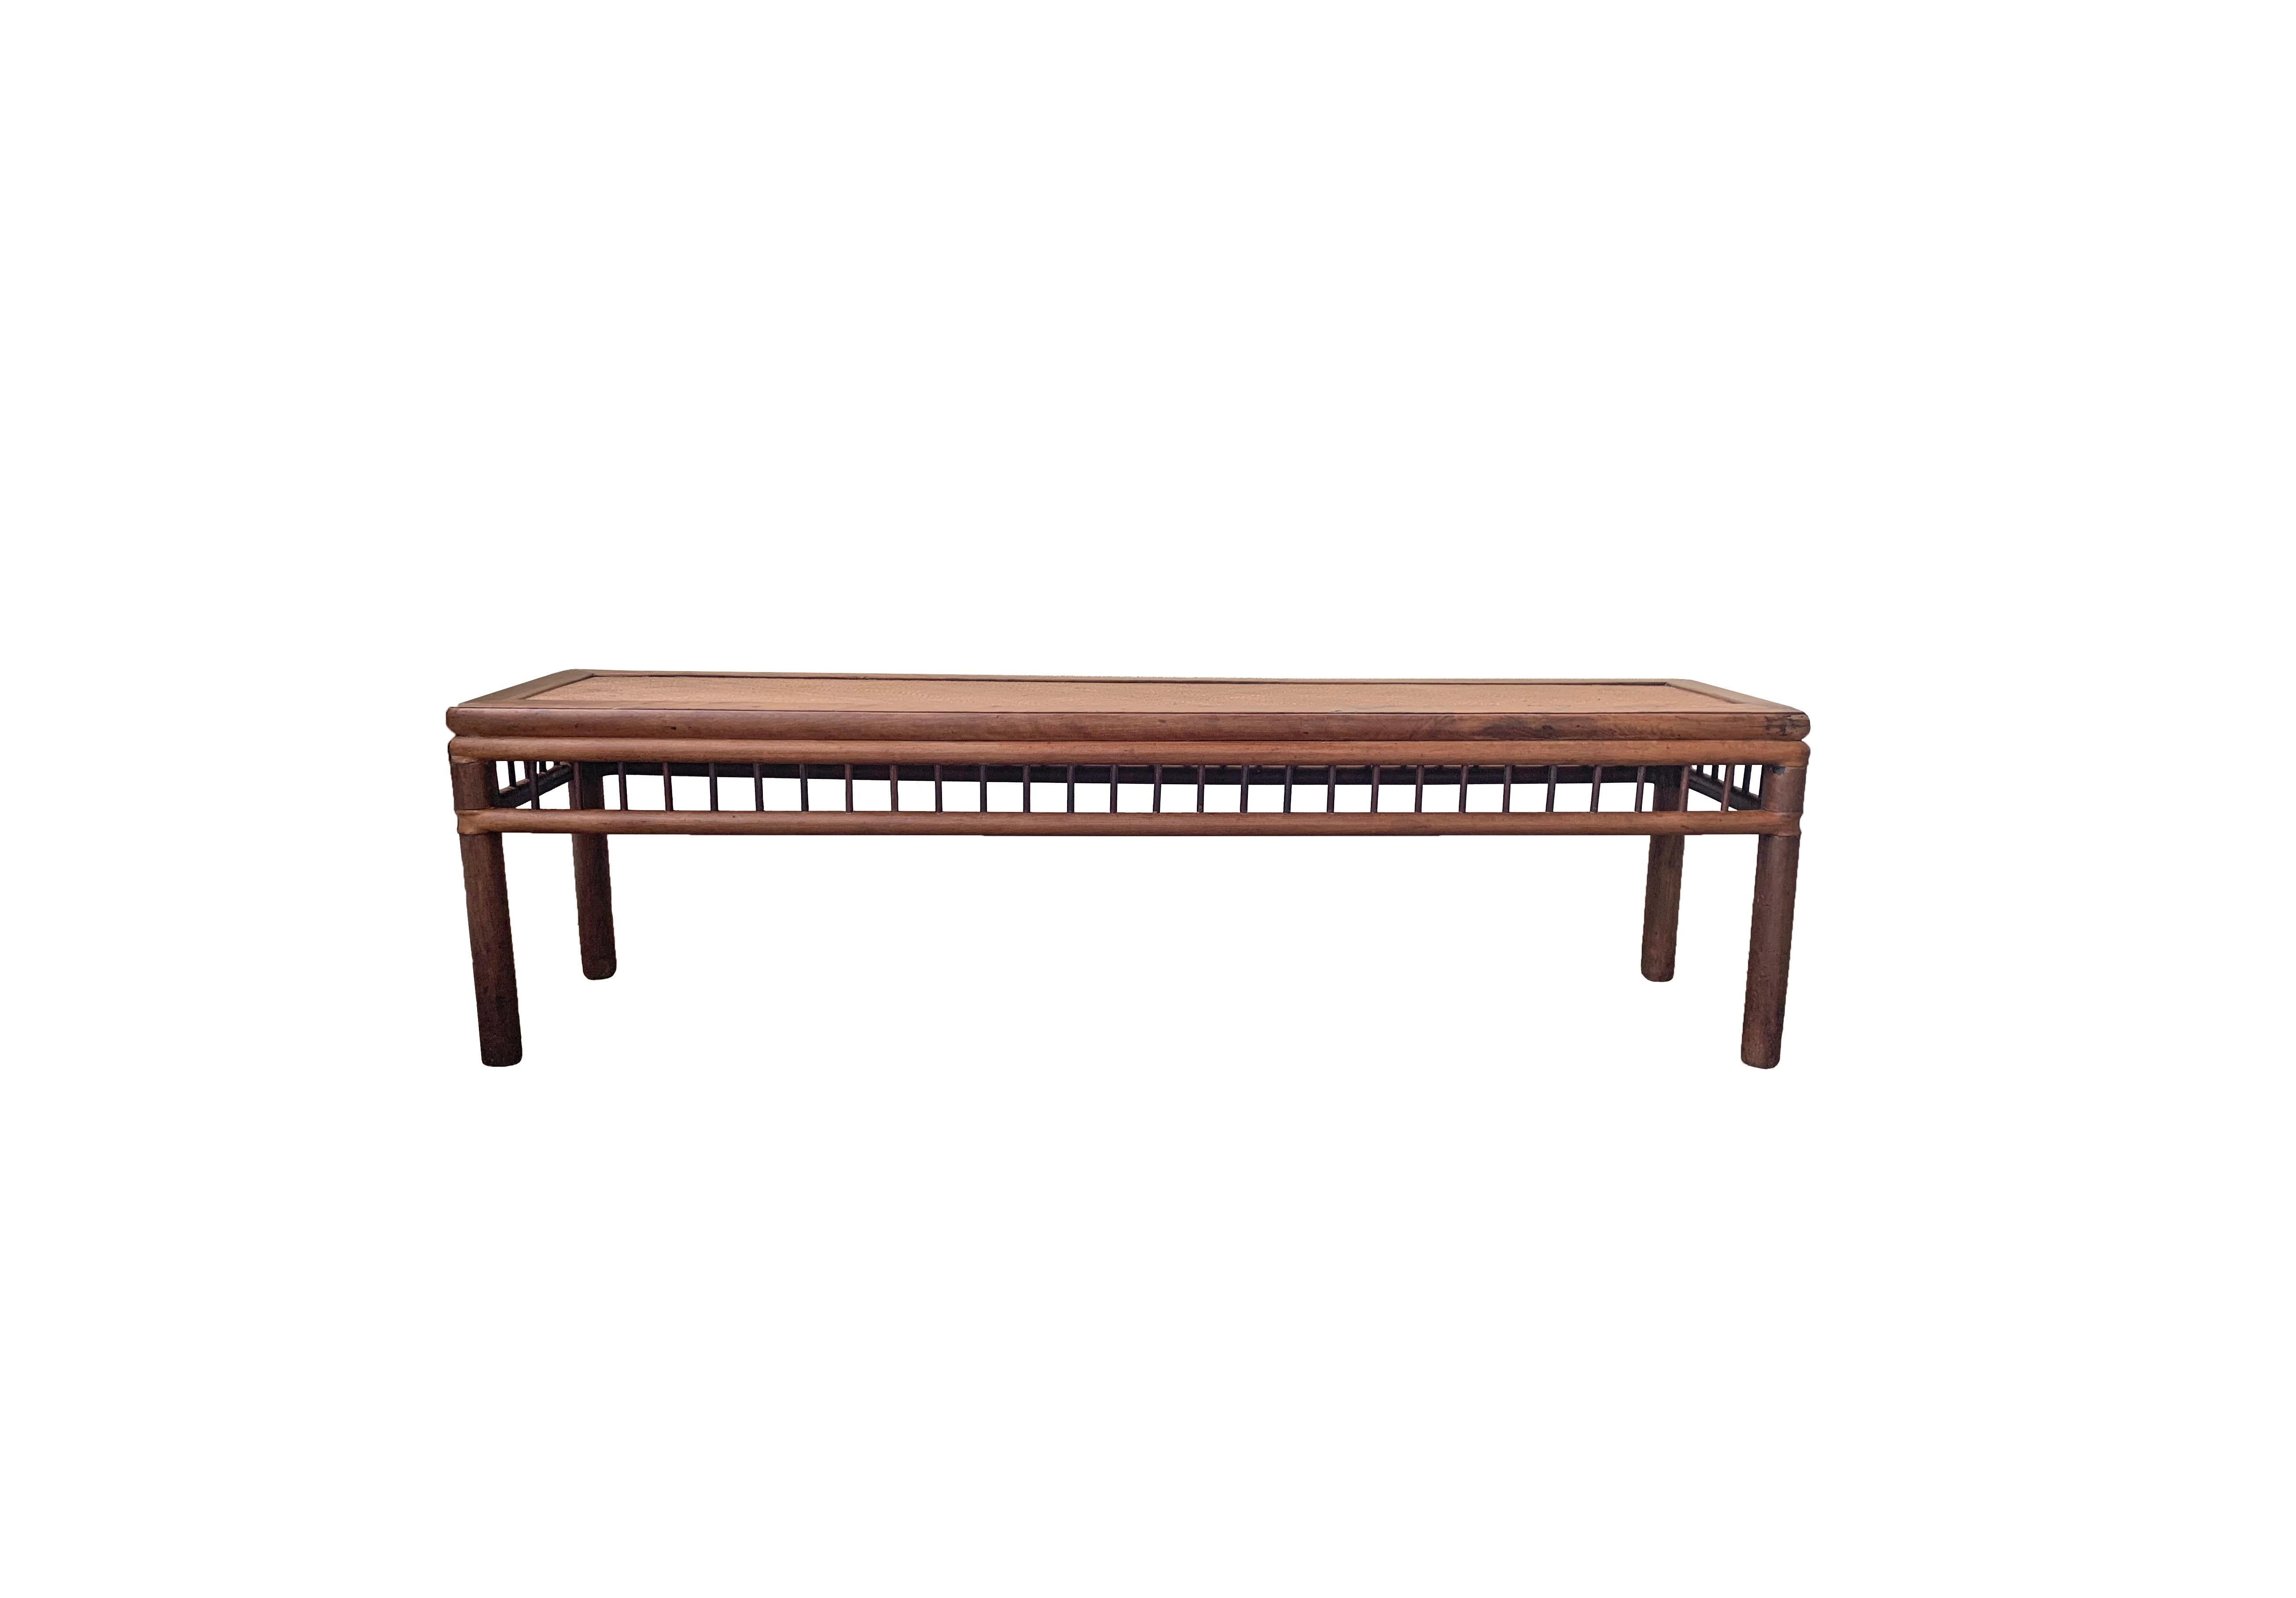 This Chinese long Bench from the Qing Dynasty features wonderfully round legs and vertical supports. It features a wonderfully elongated shape and lacquer finish. Crafted from elm wood it features a rattan seat and age related patina and textures.